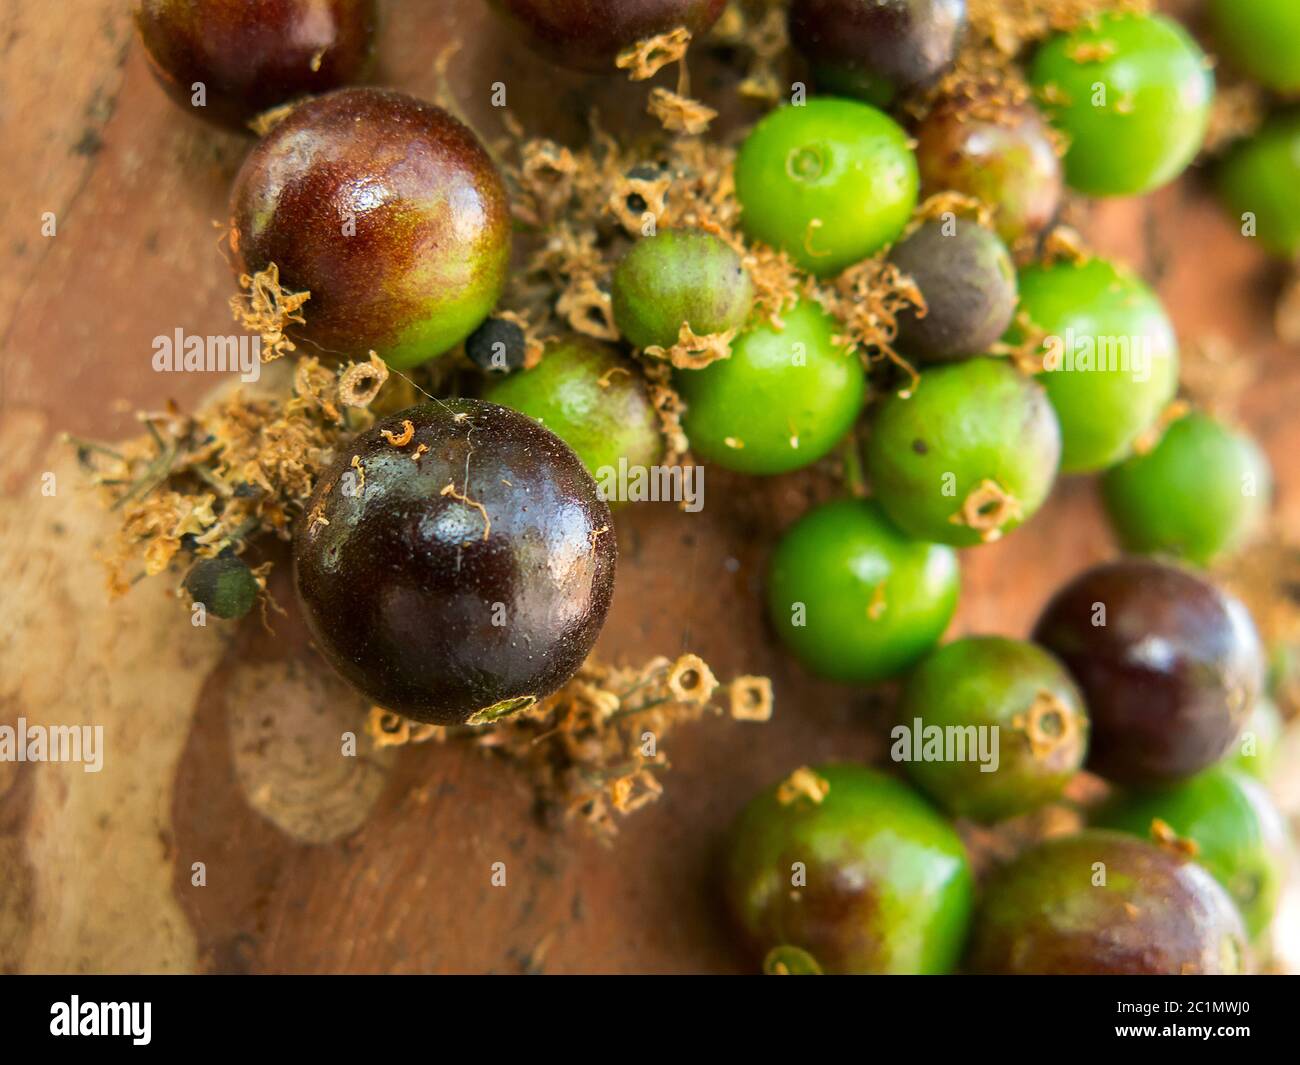 Jaboticaba brazilian tree with a lot of green fruits on trunk Stock Photo